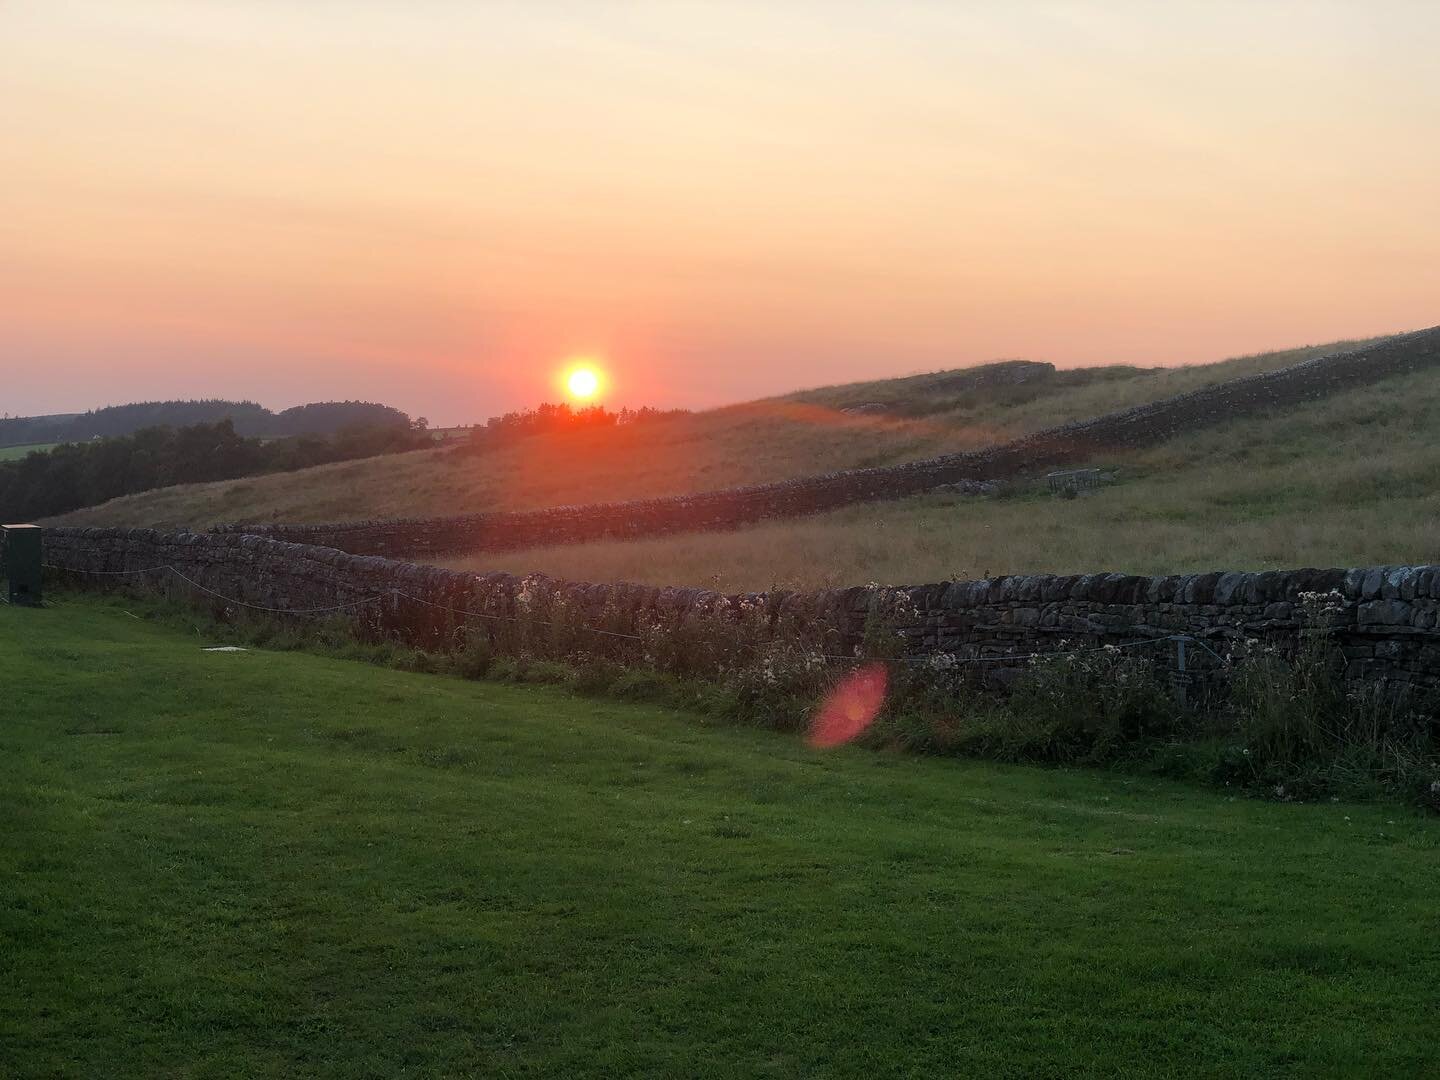 Day 17 was a long day for Paul but the sun broke through and he was treated to some beautiful blue skies. He conquered High Cup Nick and Cross Fell on the Pennine Way. He&rsquo;s covered a total of 700 miles over 17 days. What a phenomenal effort 🙌?